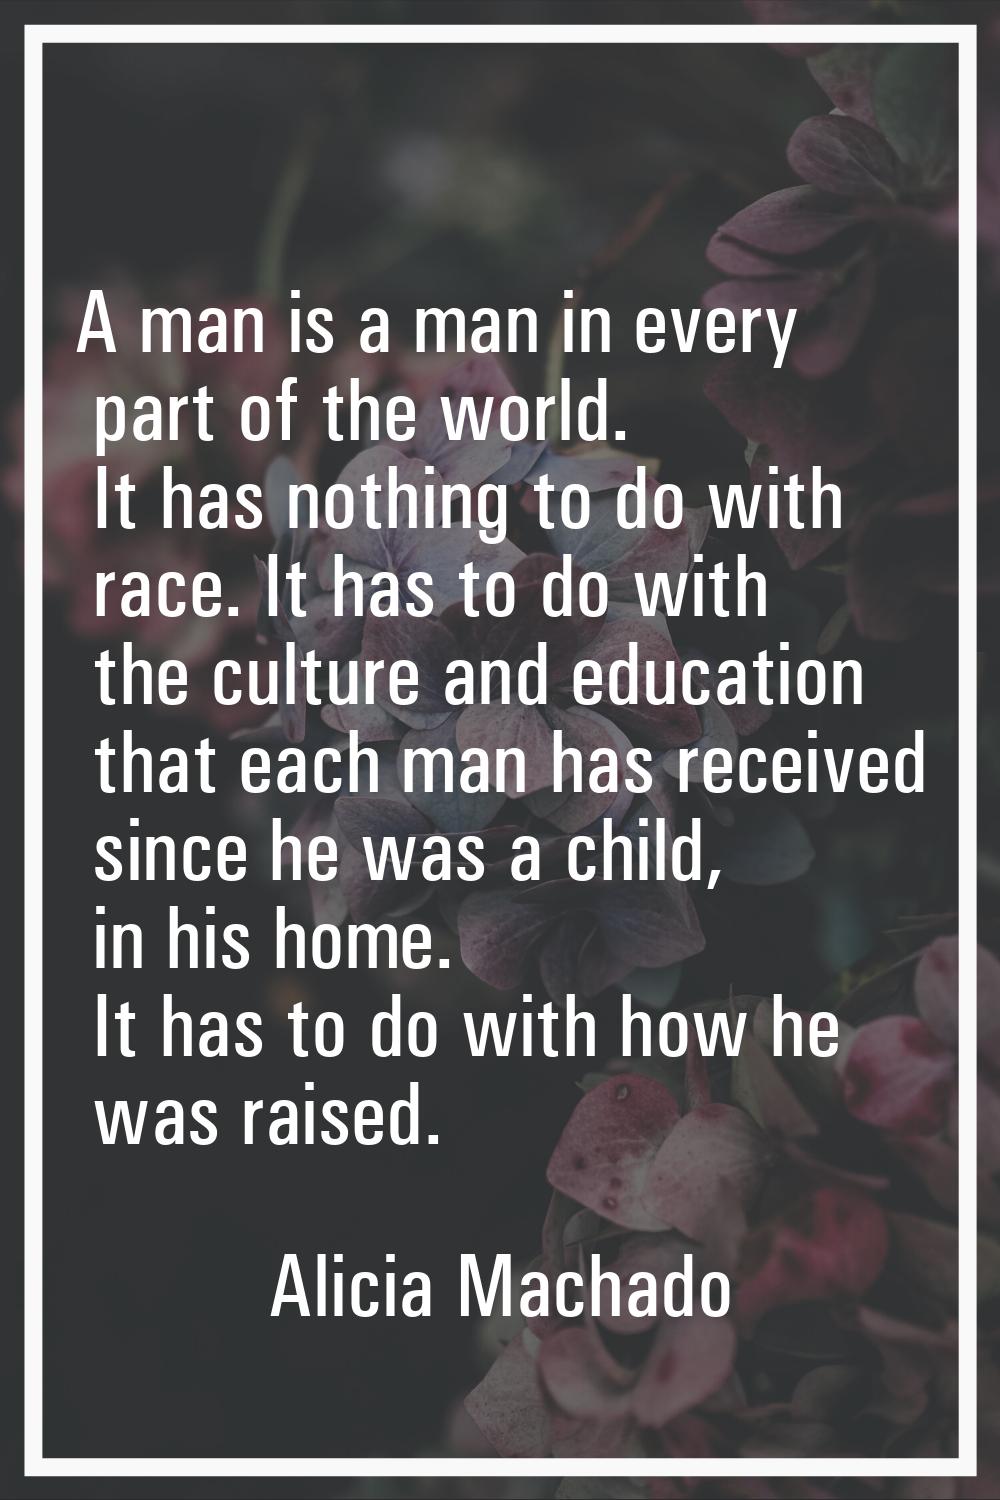 A man is a man in every part of the world. It has nothing to do with race. It has to do with the cu